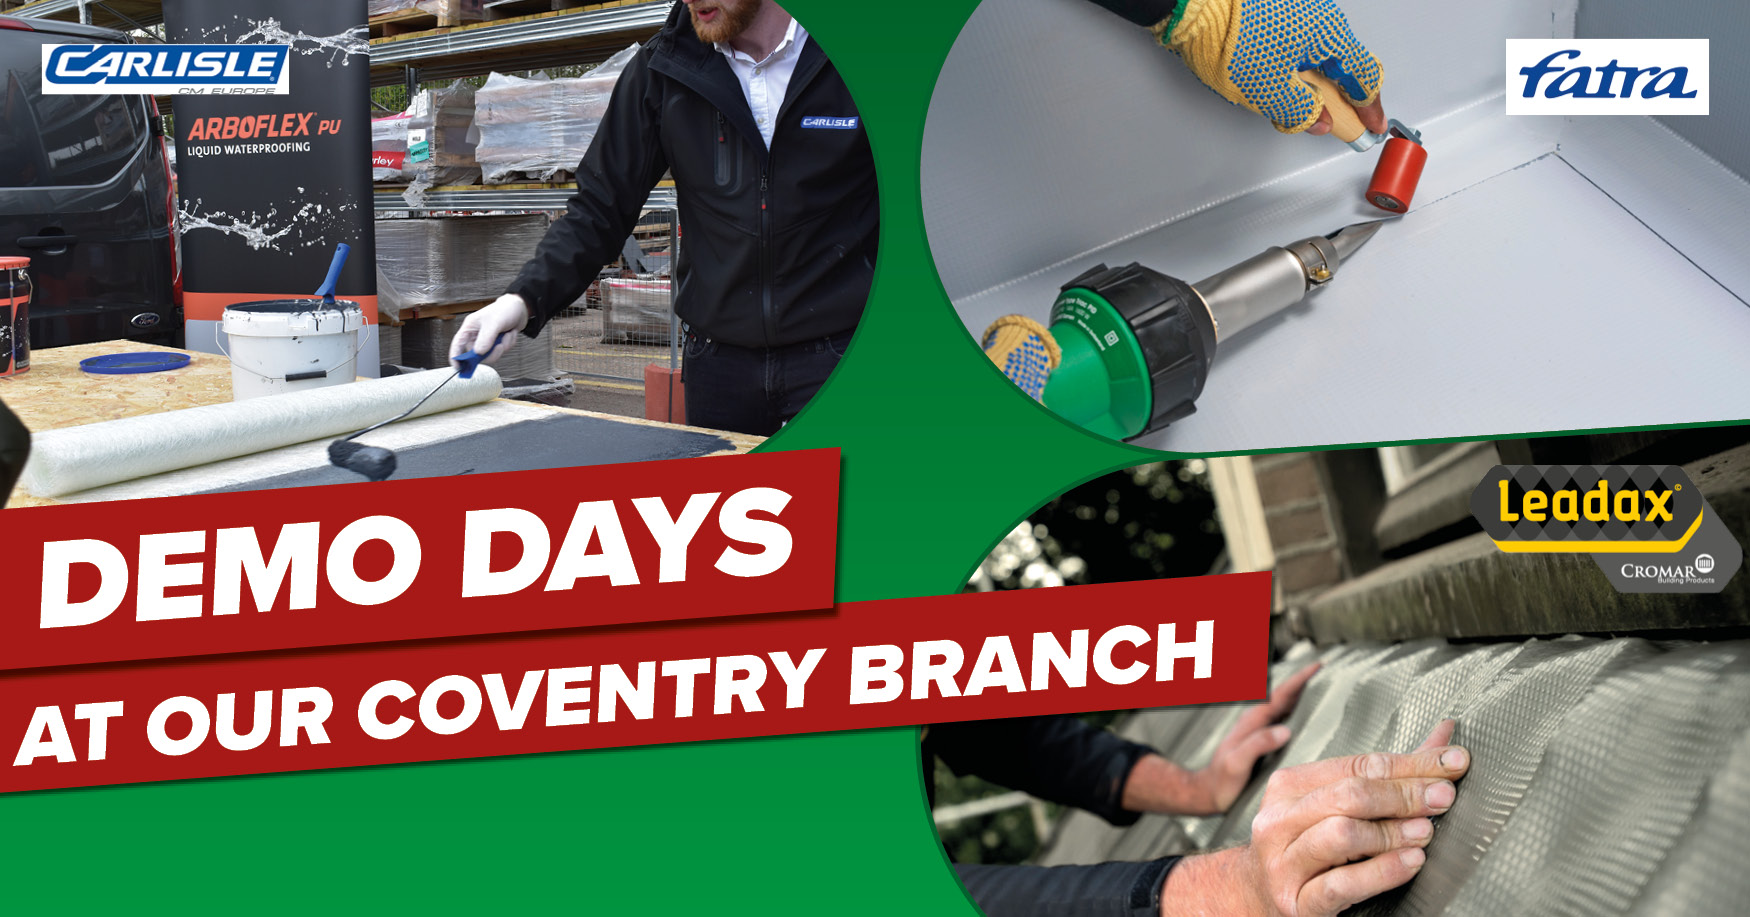 Coventry Demo Days Announced